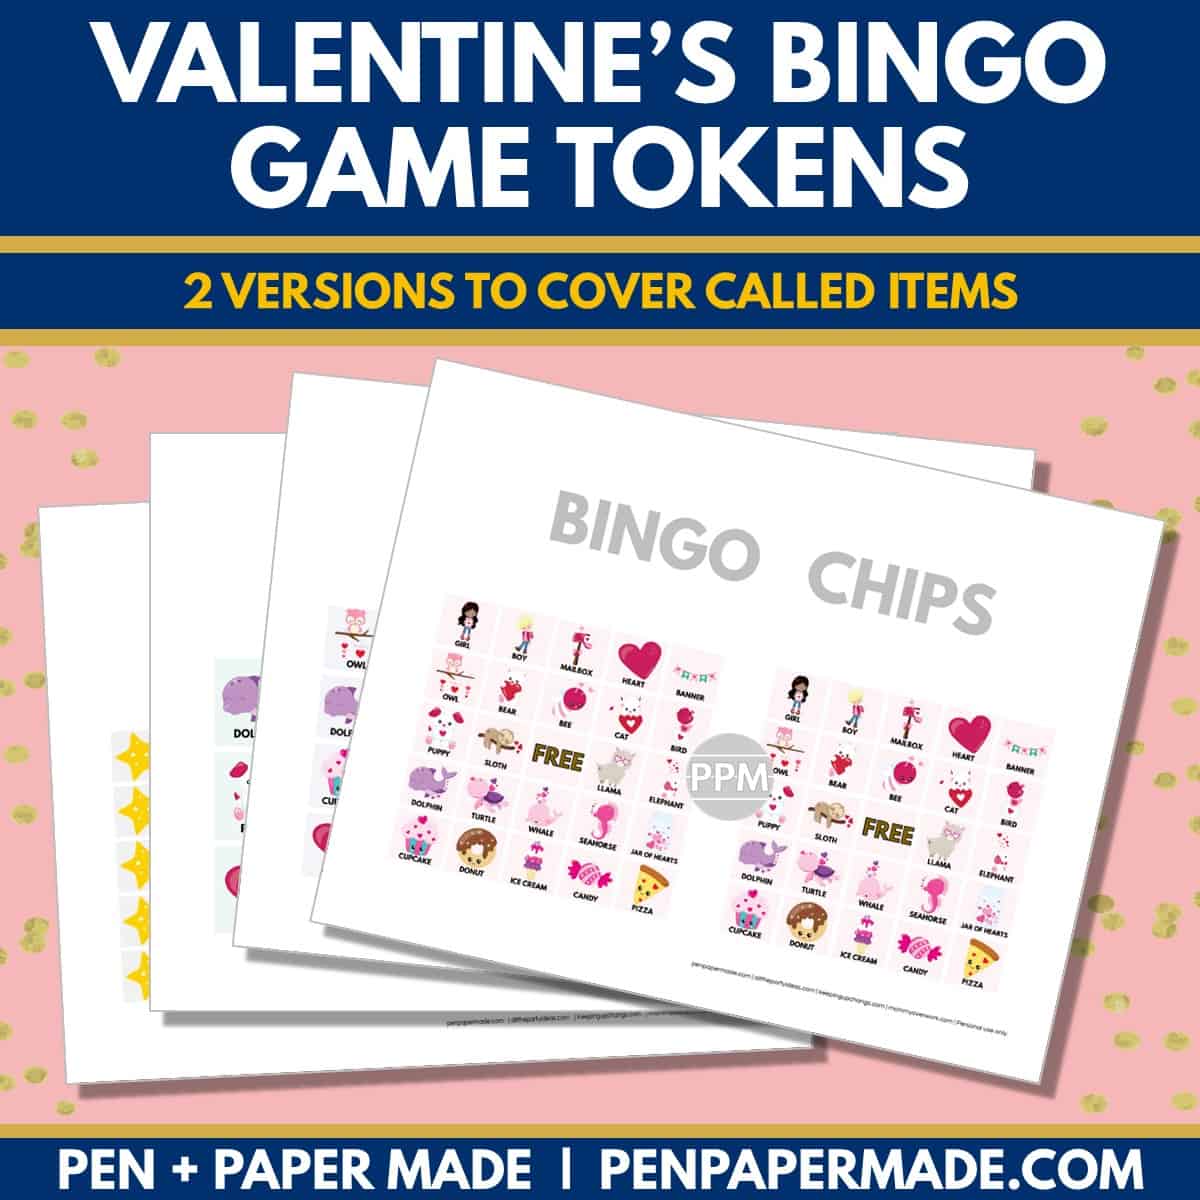 valentine's day bingo card 5x5, 4x4, 3x3 game chips, tokens, markers.